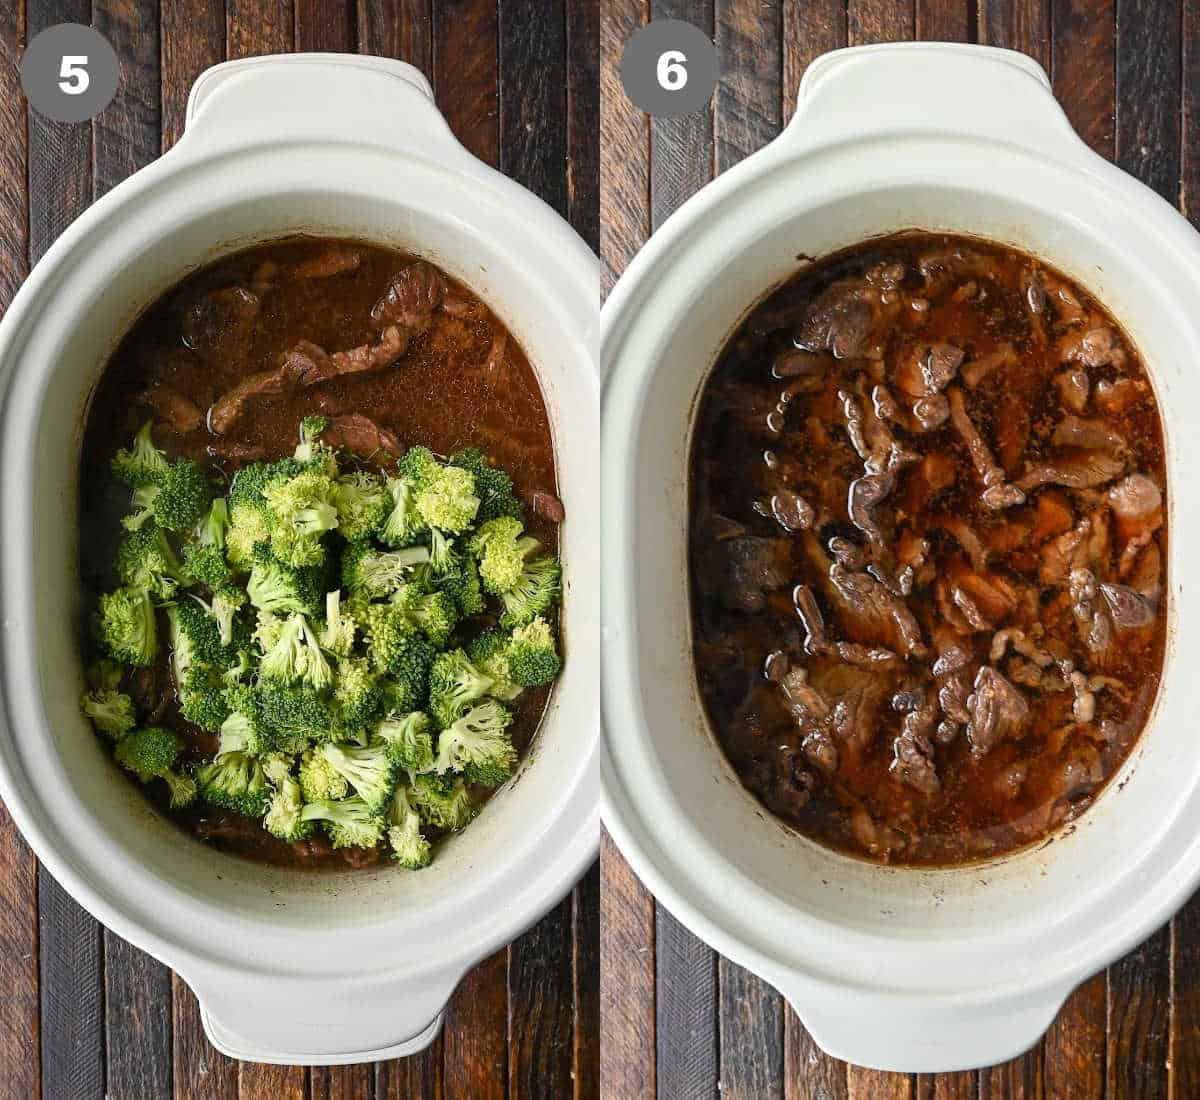 Steps 5 and 6 for making slow cooker beef and broccoli.